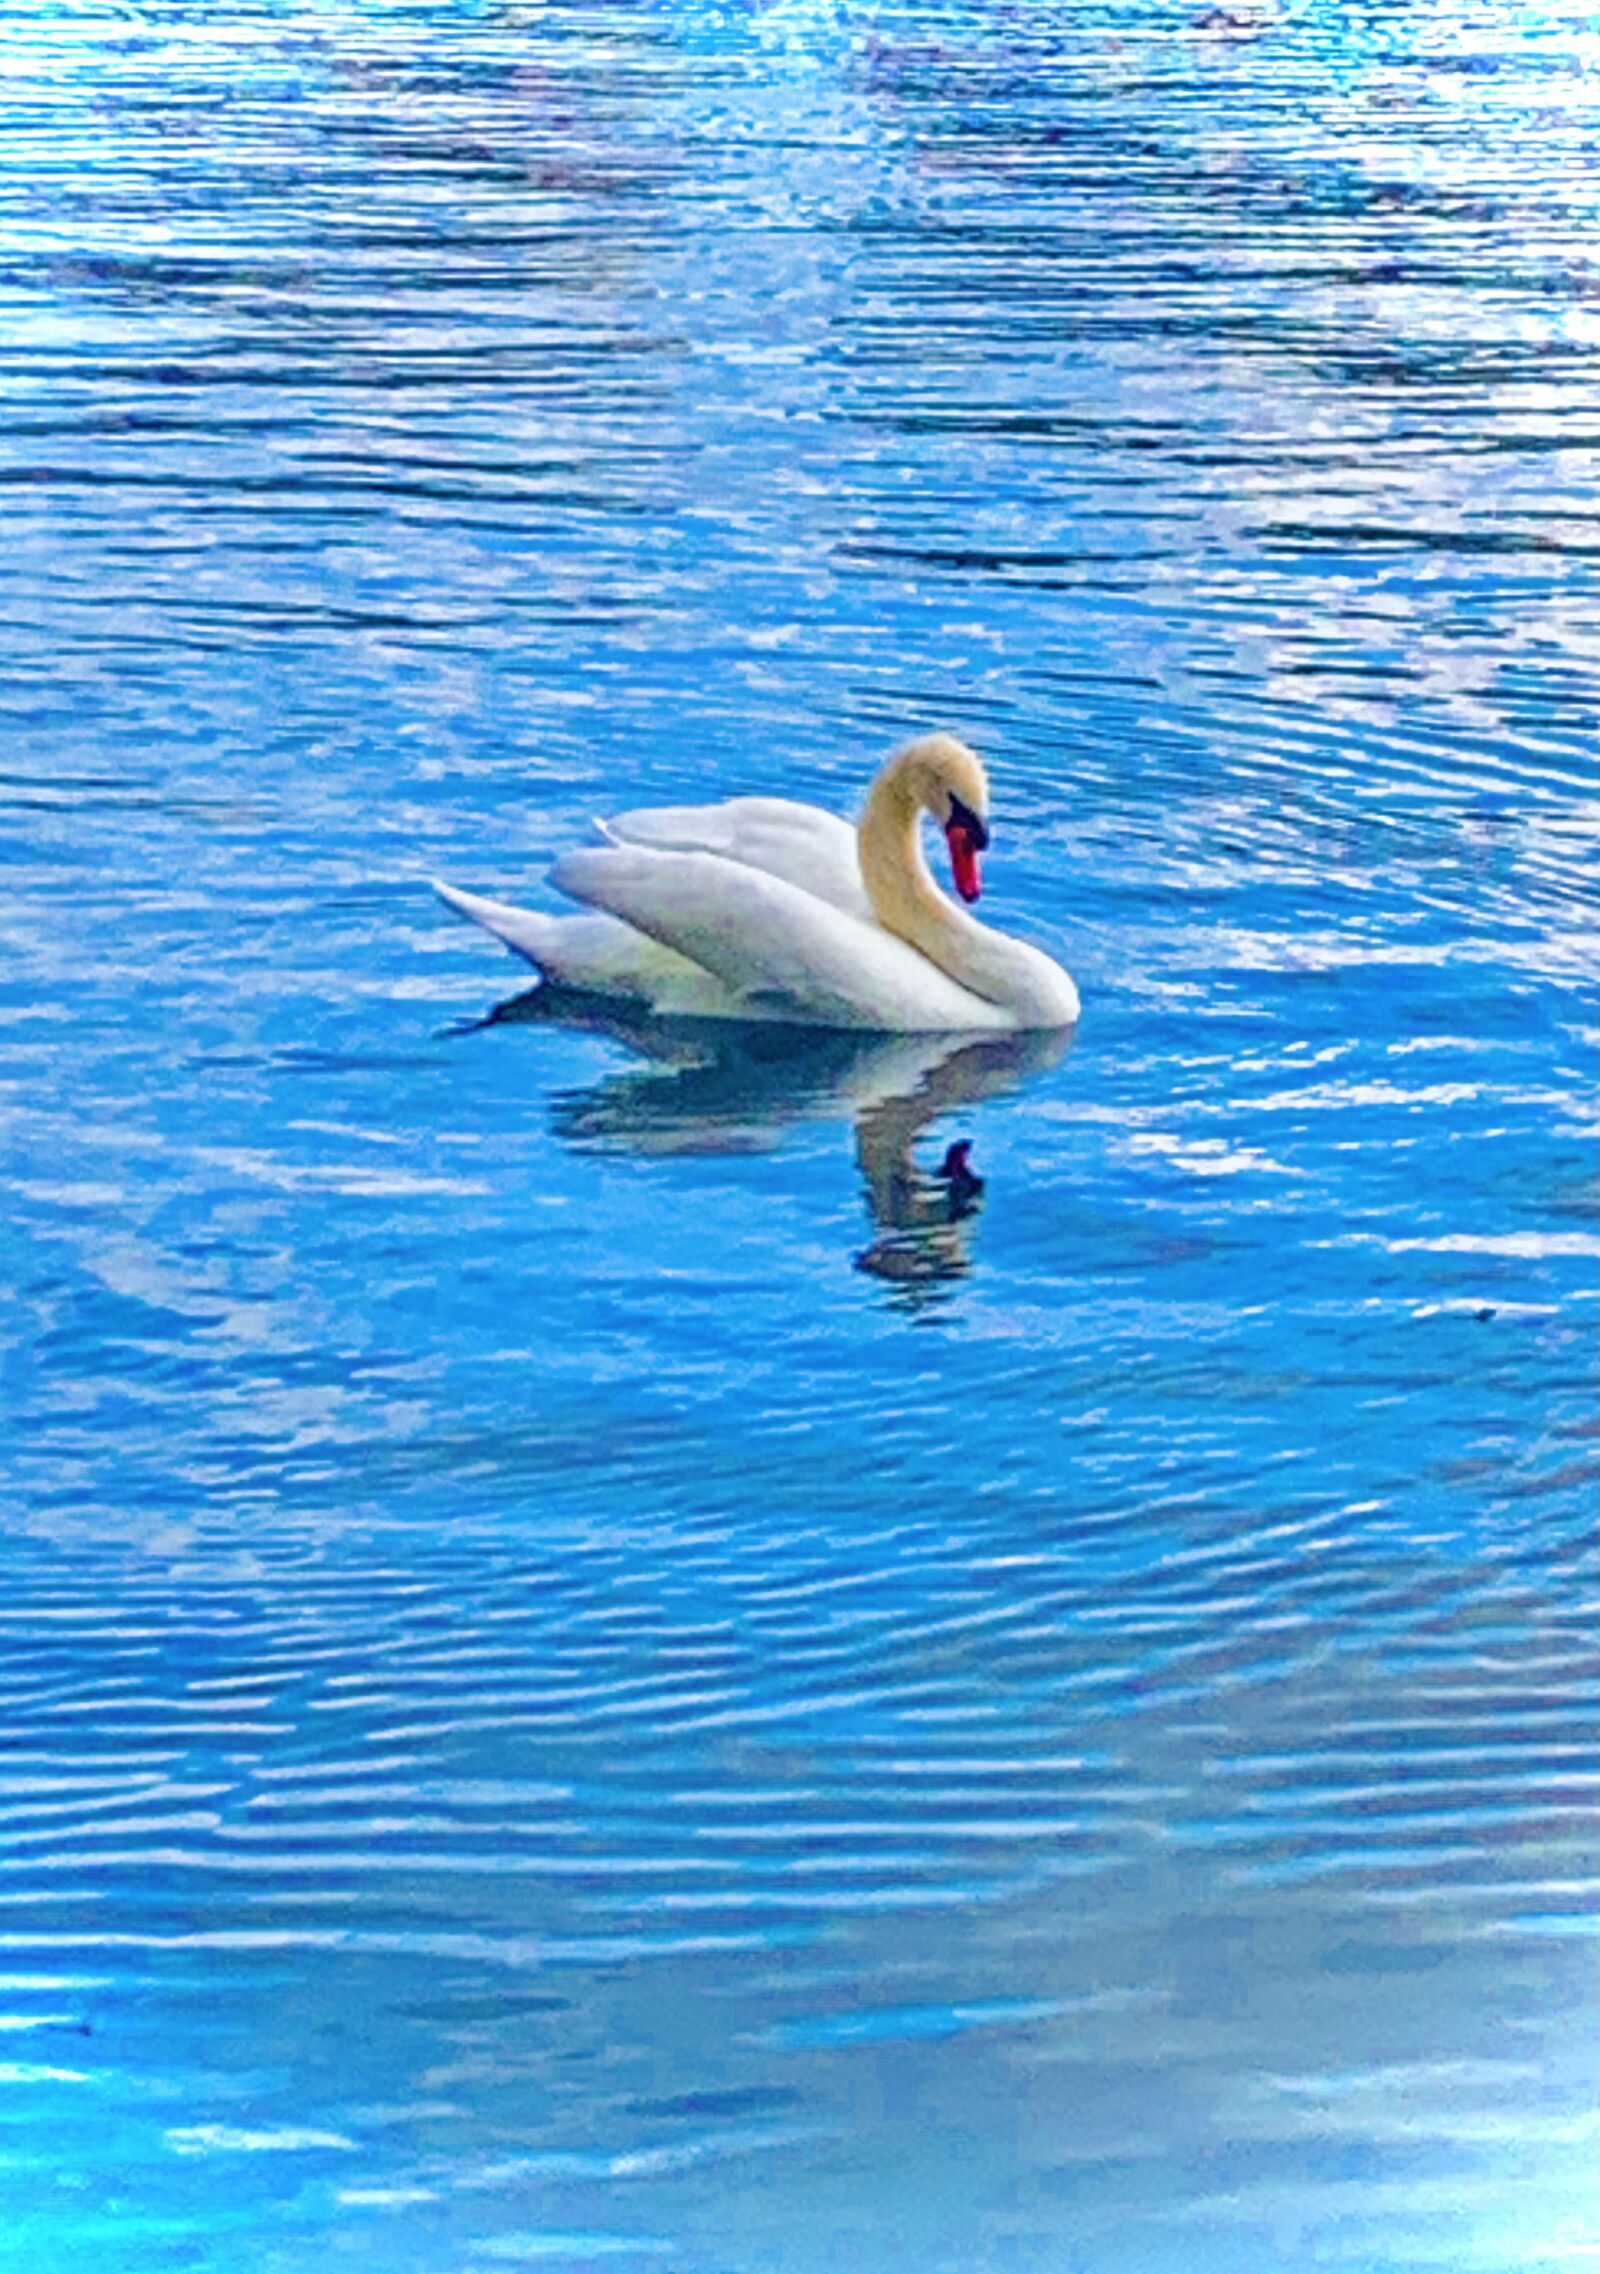 Apple iPhone XS Max + iPhone XS Max back dual camera 4.25mm f/1.8 sample photo. Swan, water, animals photography